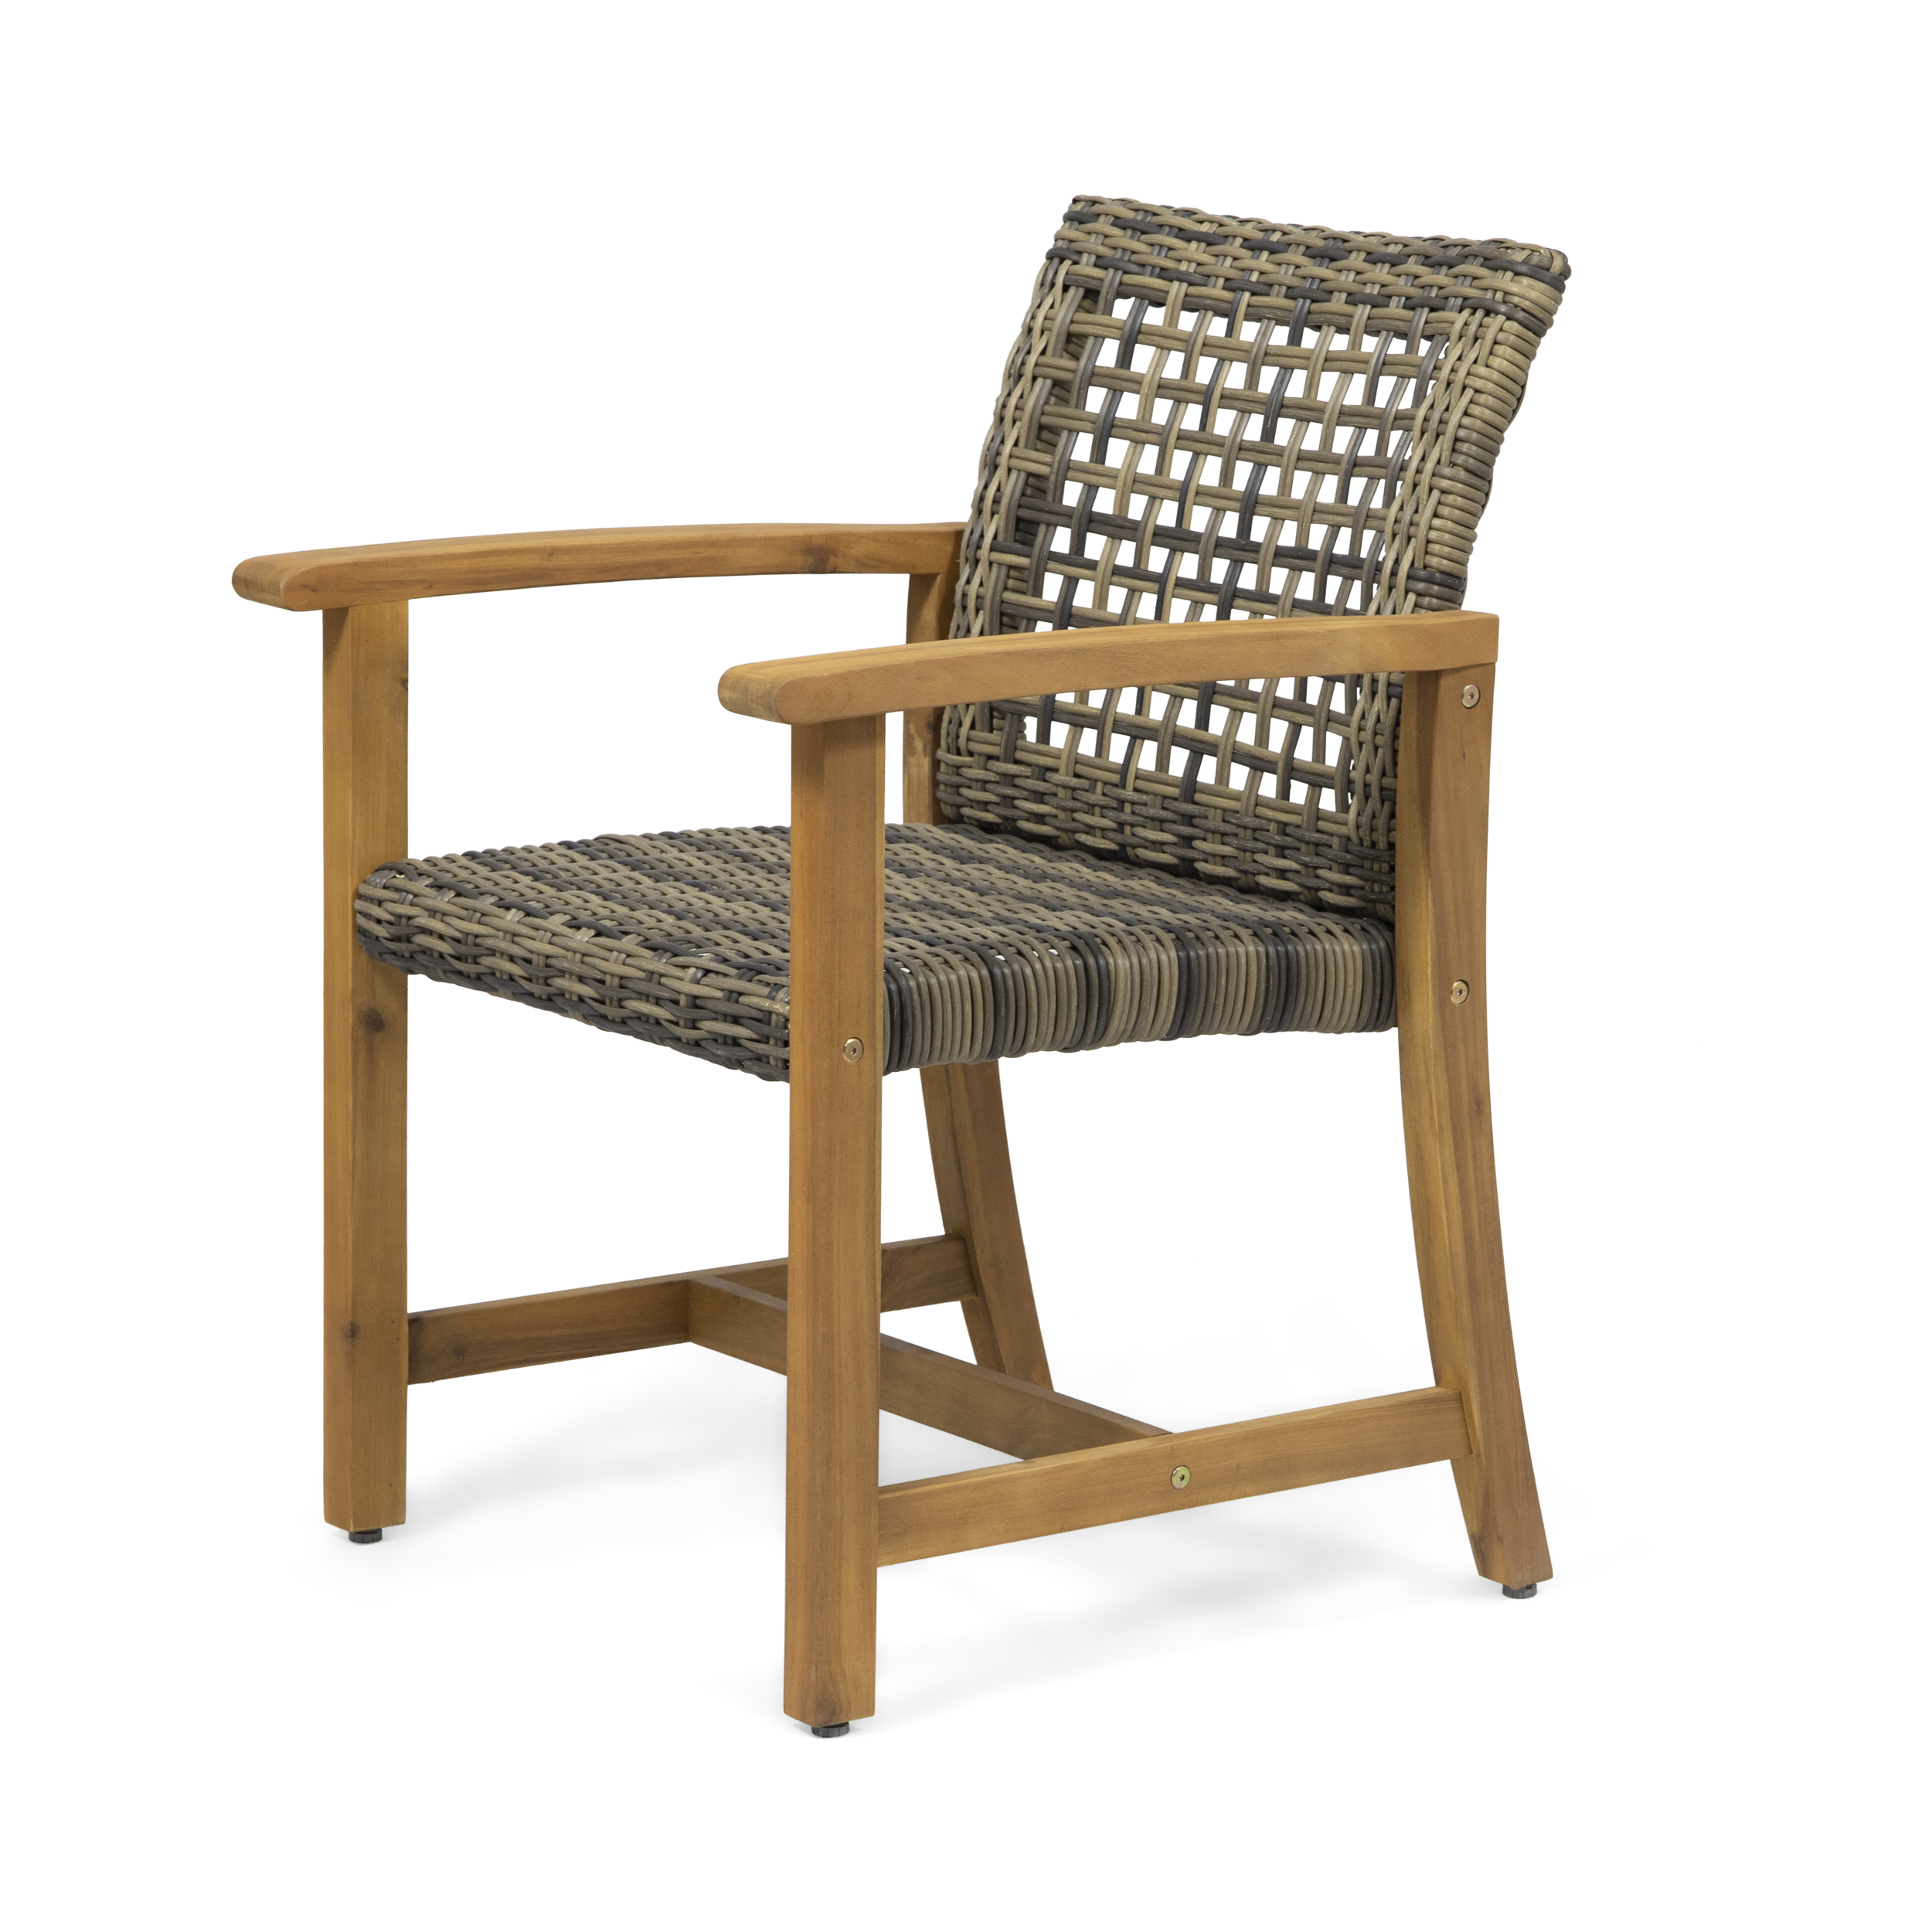 GDF Studio Beacher Outdoor Acacia Wood and Wicker Dining Chair (Set of 2), Natural and Gray - image 4 of 11